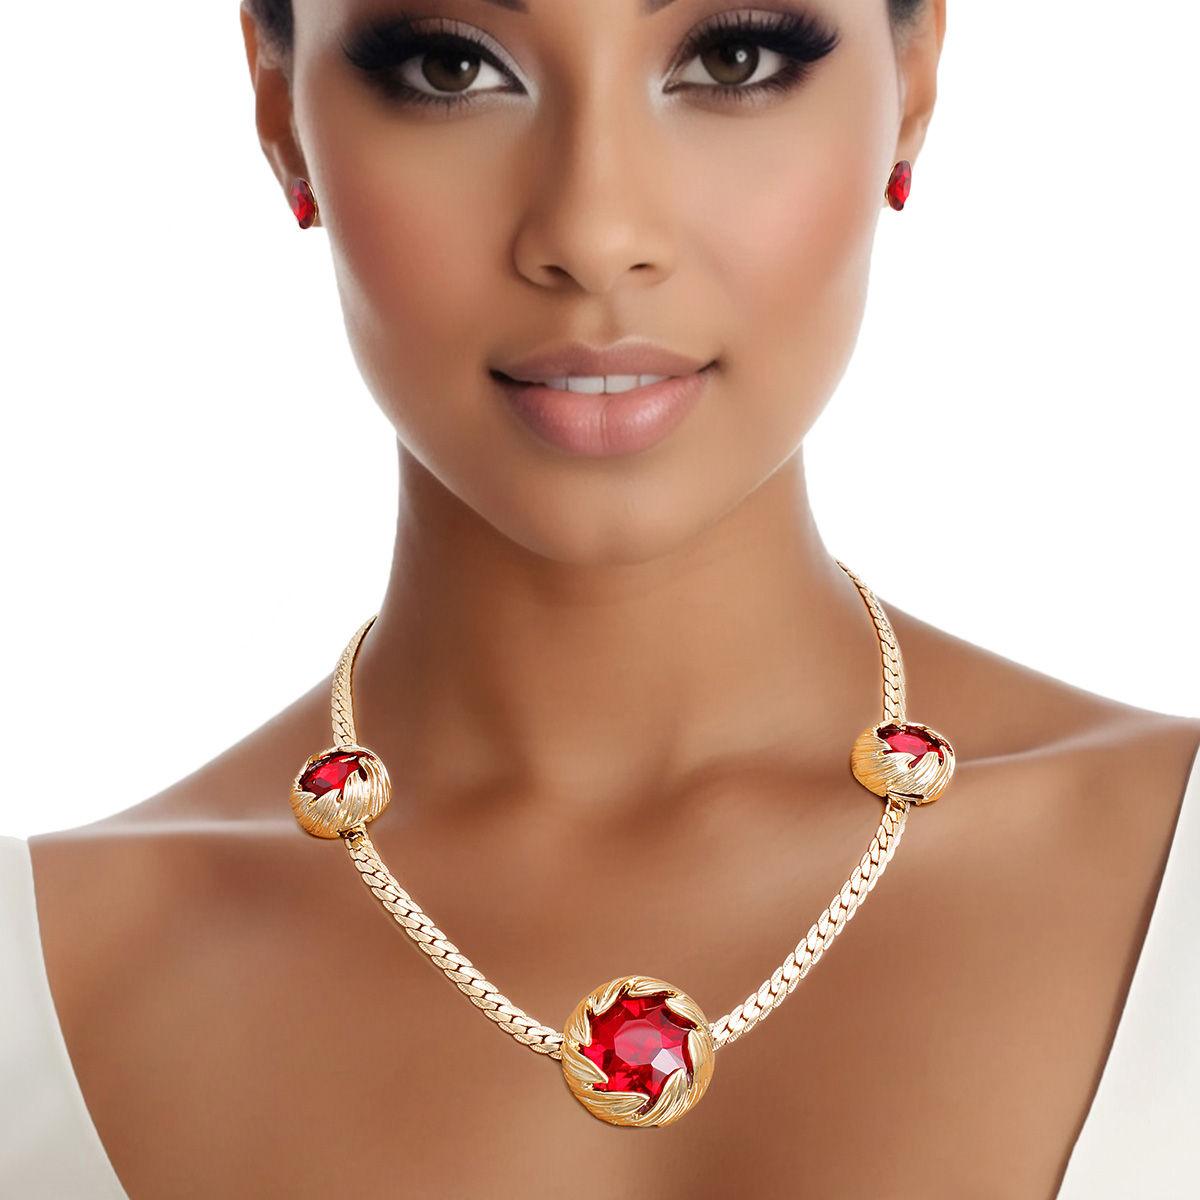 Necklace and Stud Earrings Set: Gold-Toned Triple Leaf Wrap Design with Red Crystal